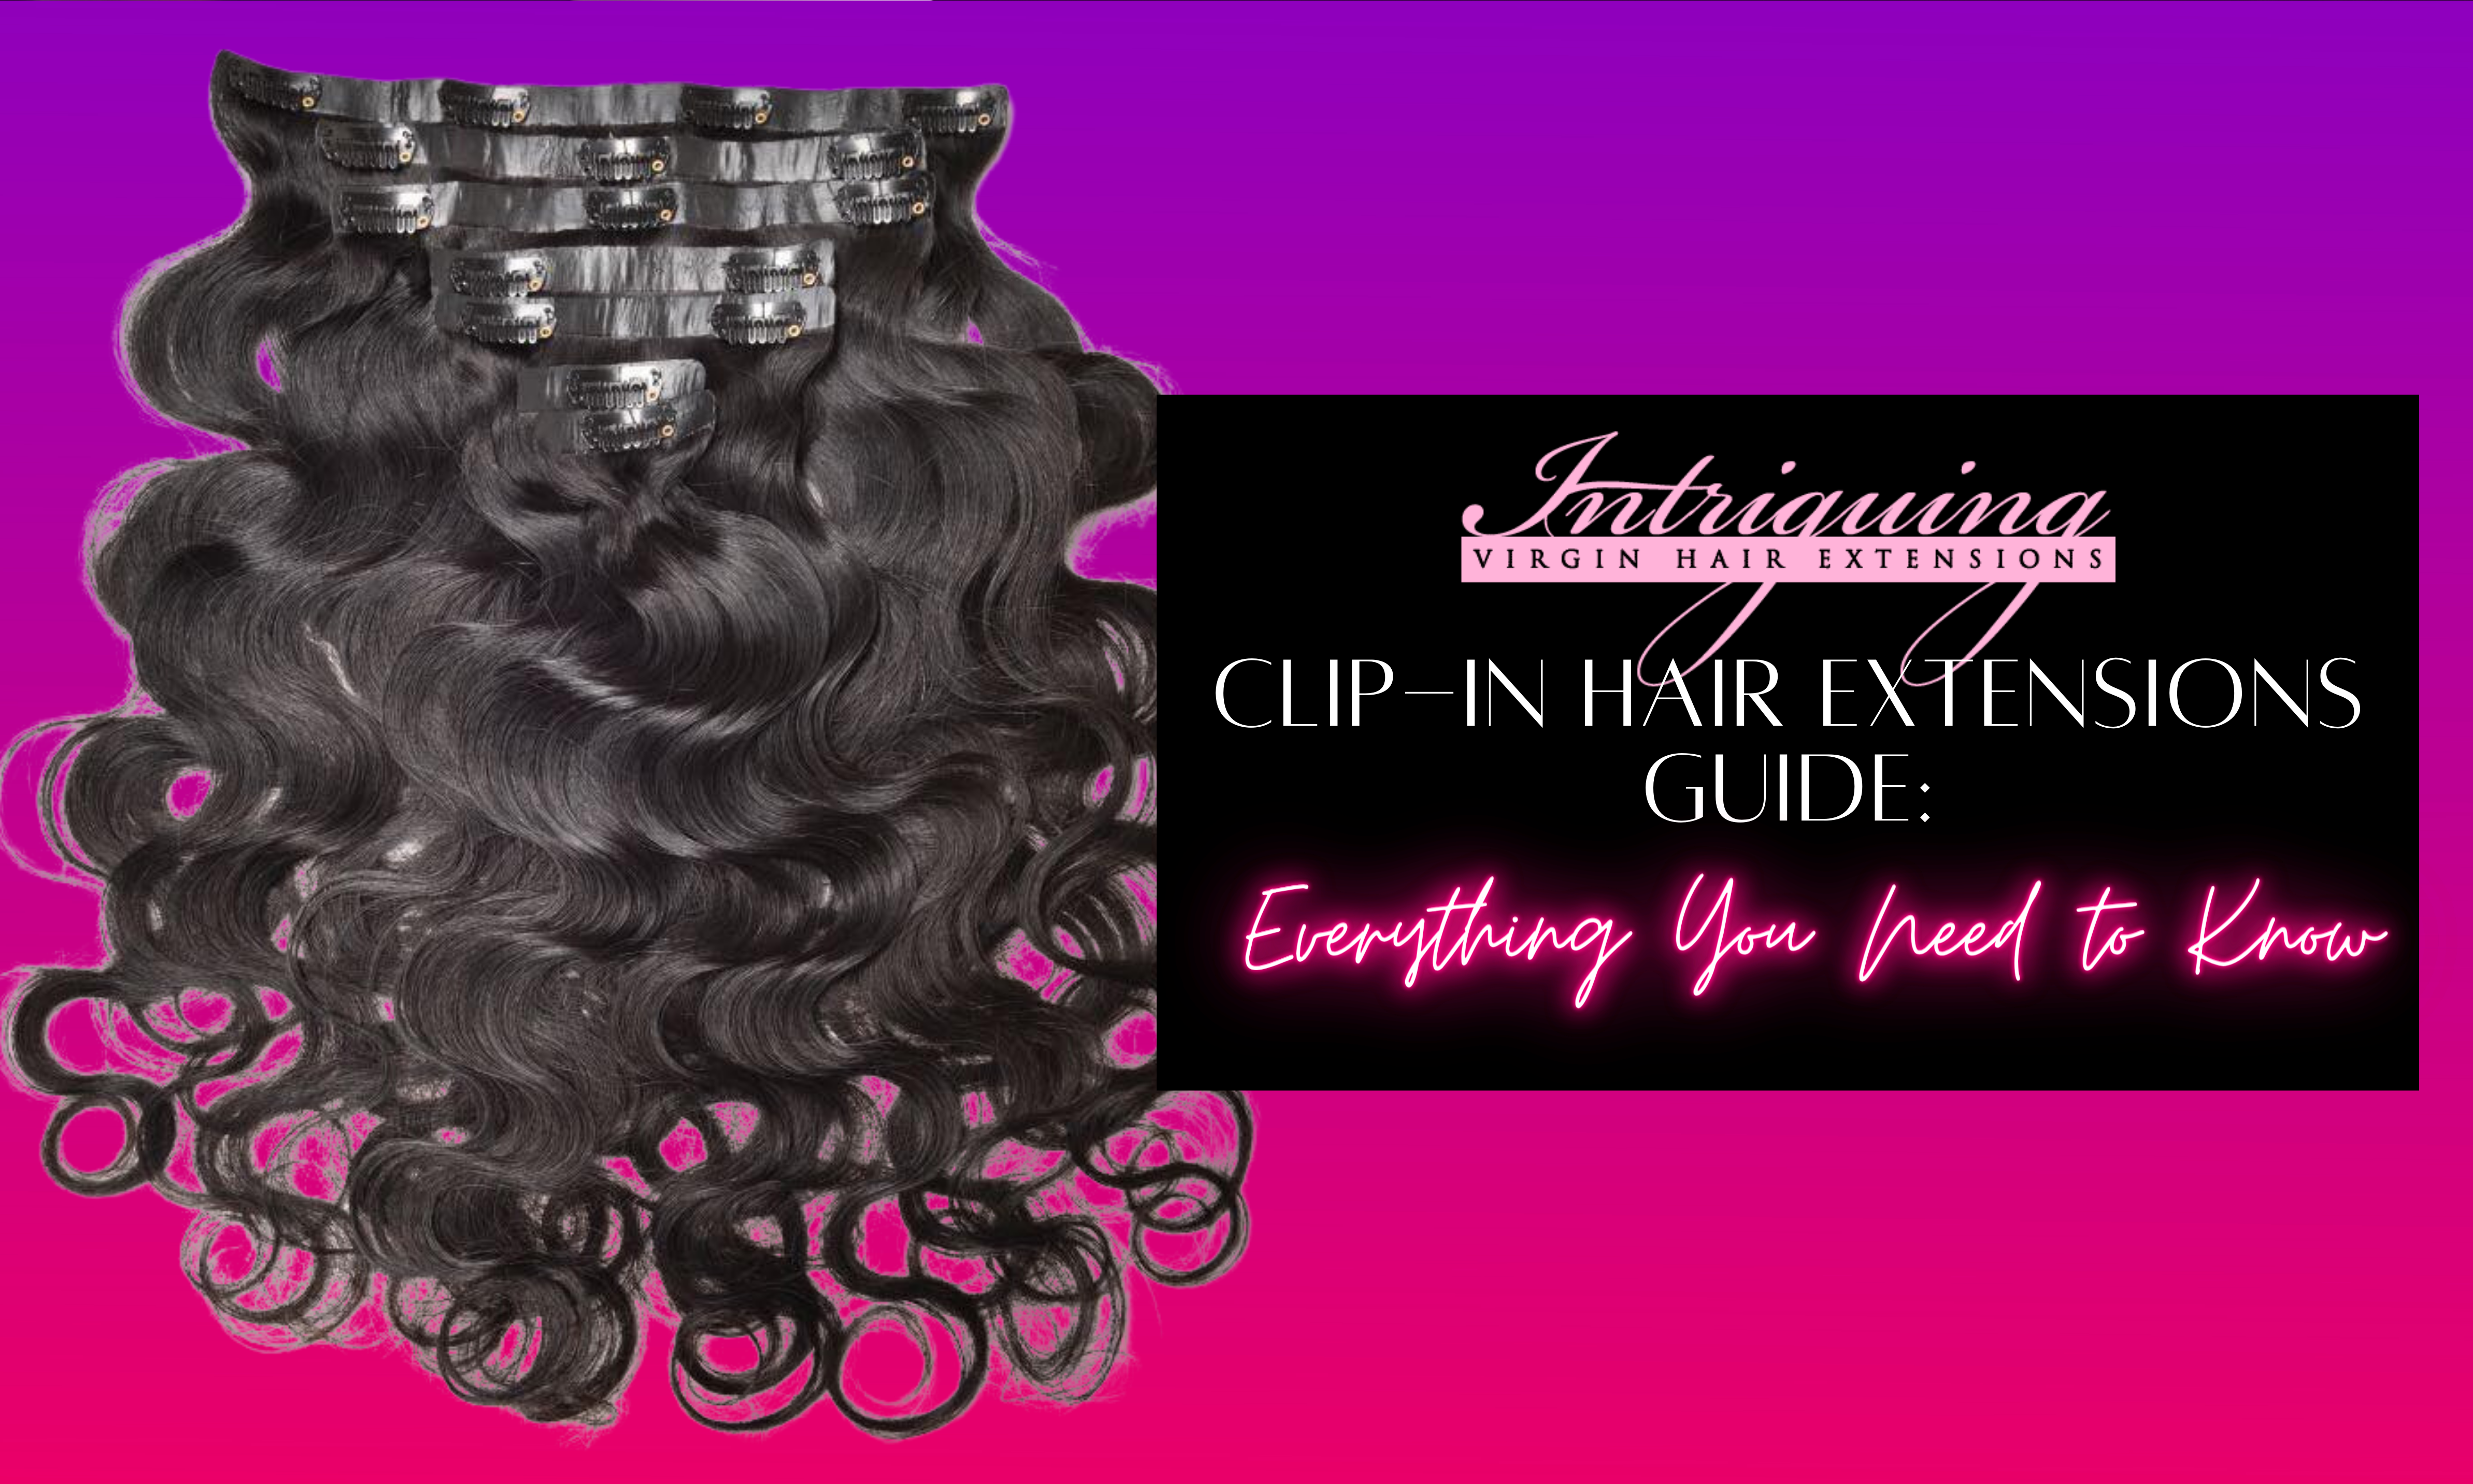 Clip-In Hair Extensions Guide: Everything You Need to Know